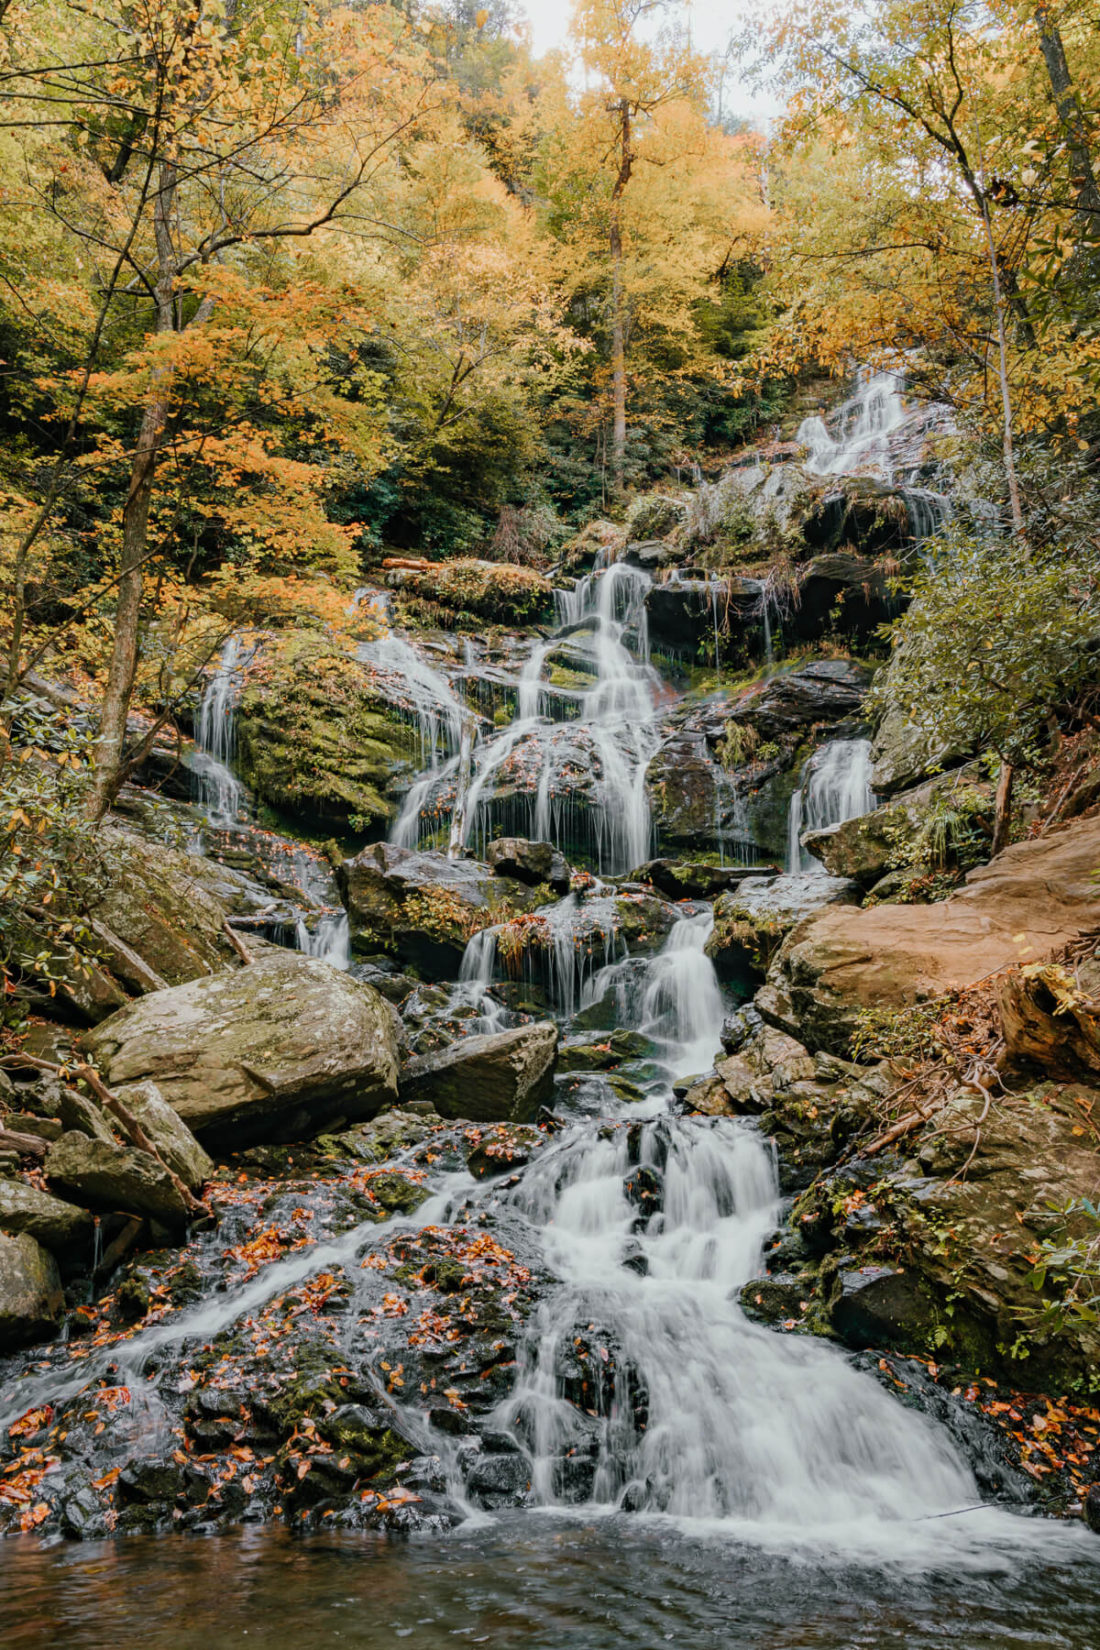 Hiking Guide: Catawba Falls Trail in Old Fort, NC - Madelyne on the Move